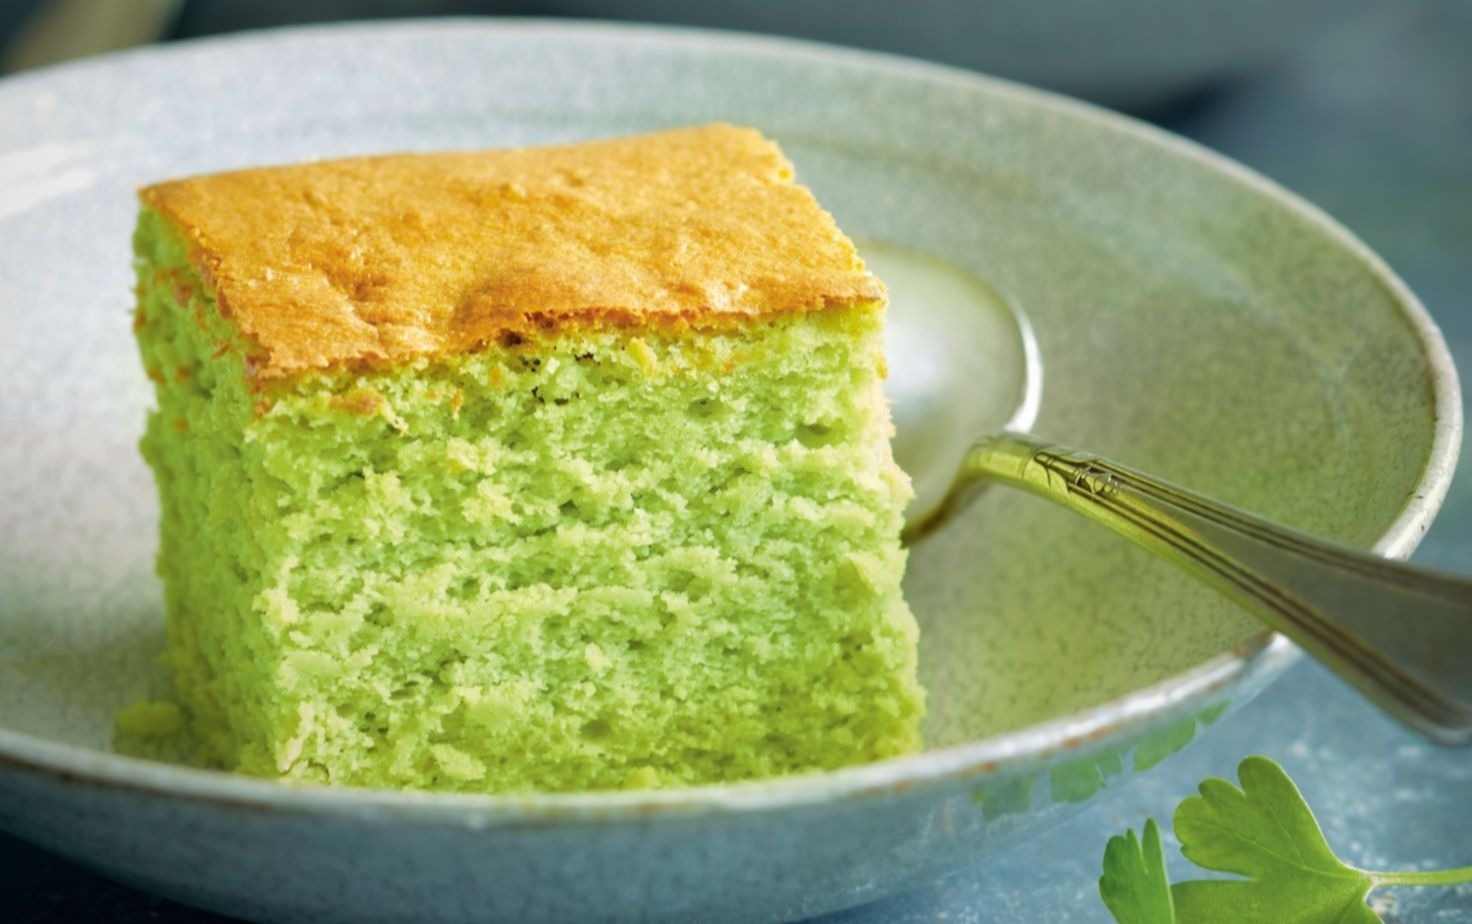 An Outrageously Decadent Japanese Parsley Cheesecake Cityline